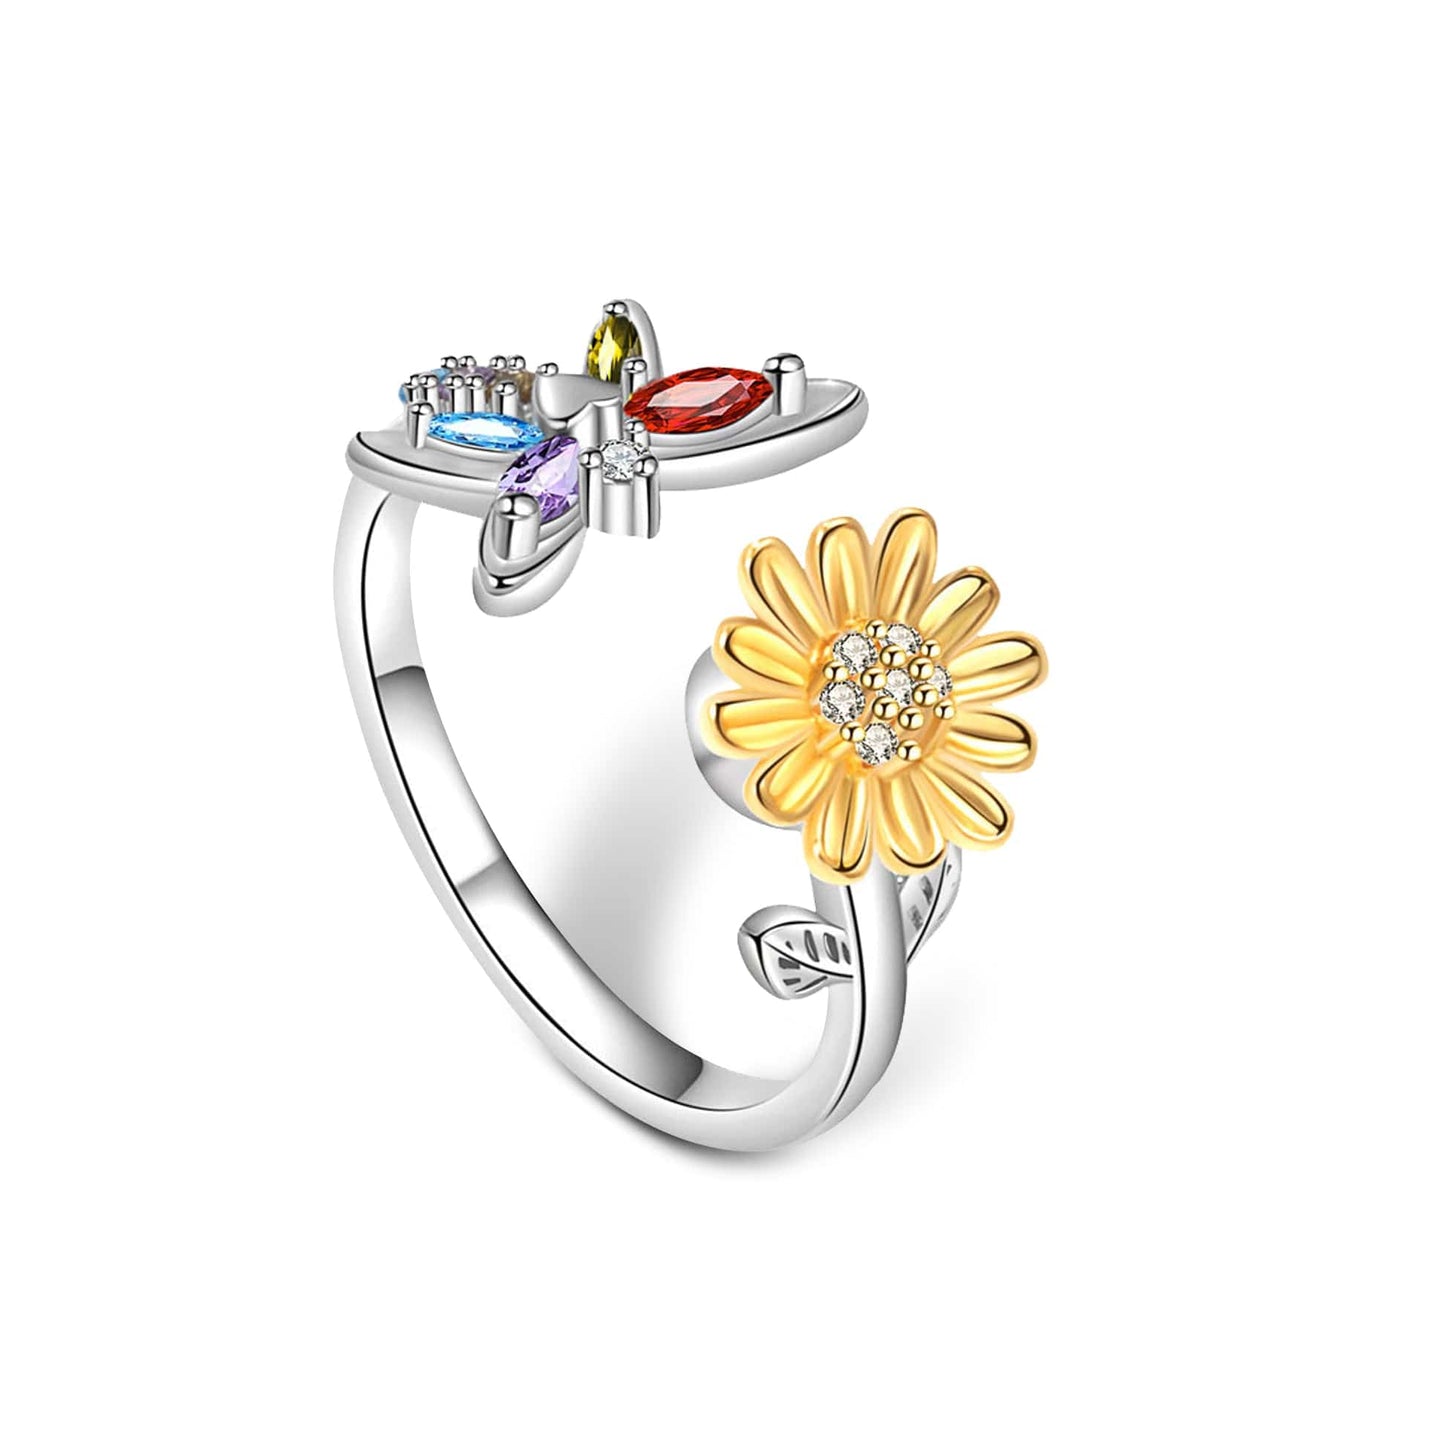 Sunflower Dragonfly Ring -  Spinning Fidget Anxiety Ring